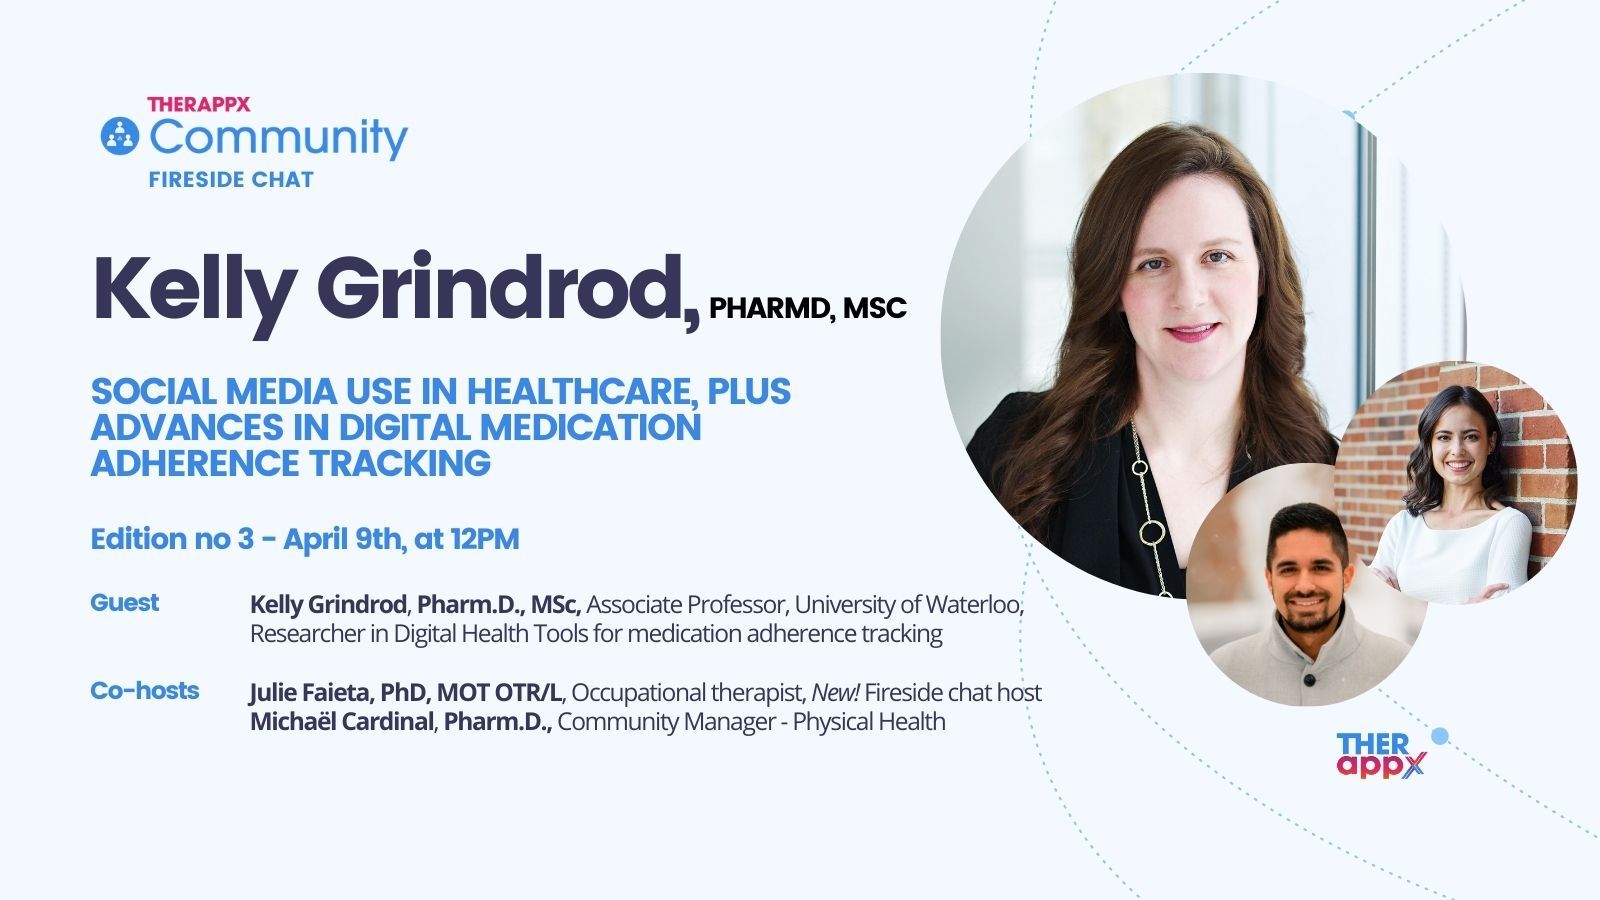 Invitation: Social media use, and medication adherence trackers - Fireside chat 02 - April 9th at 12 PM